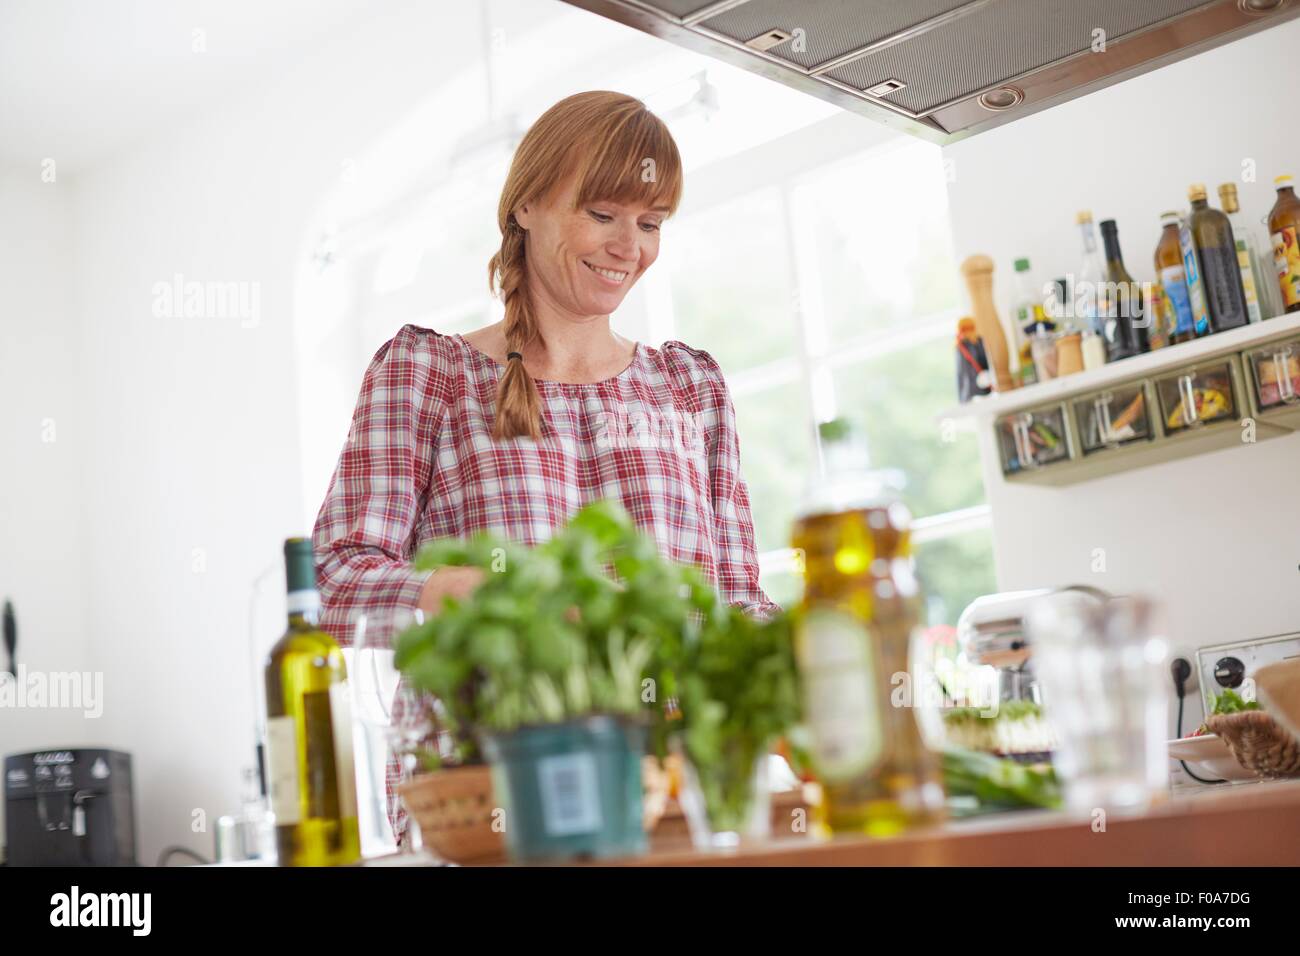 Woman preparing meal in kitchen Banque D'Images